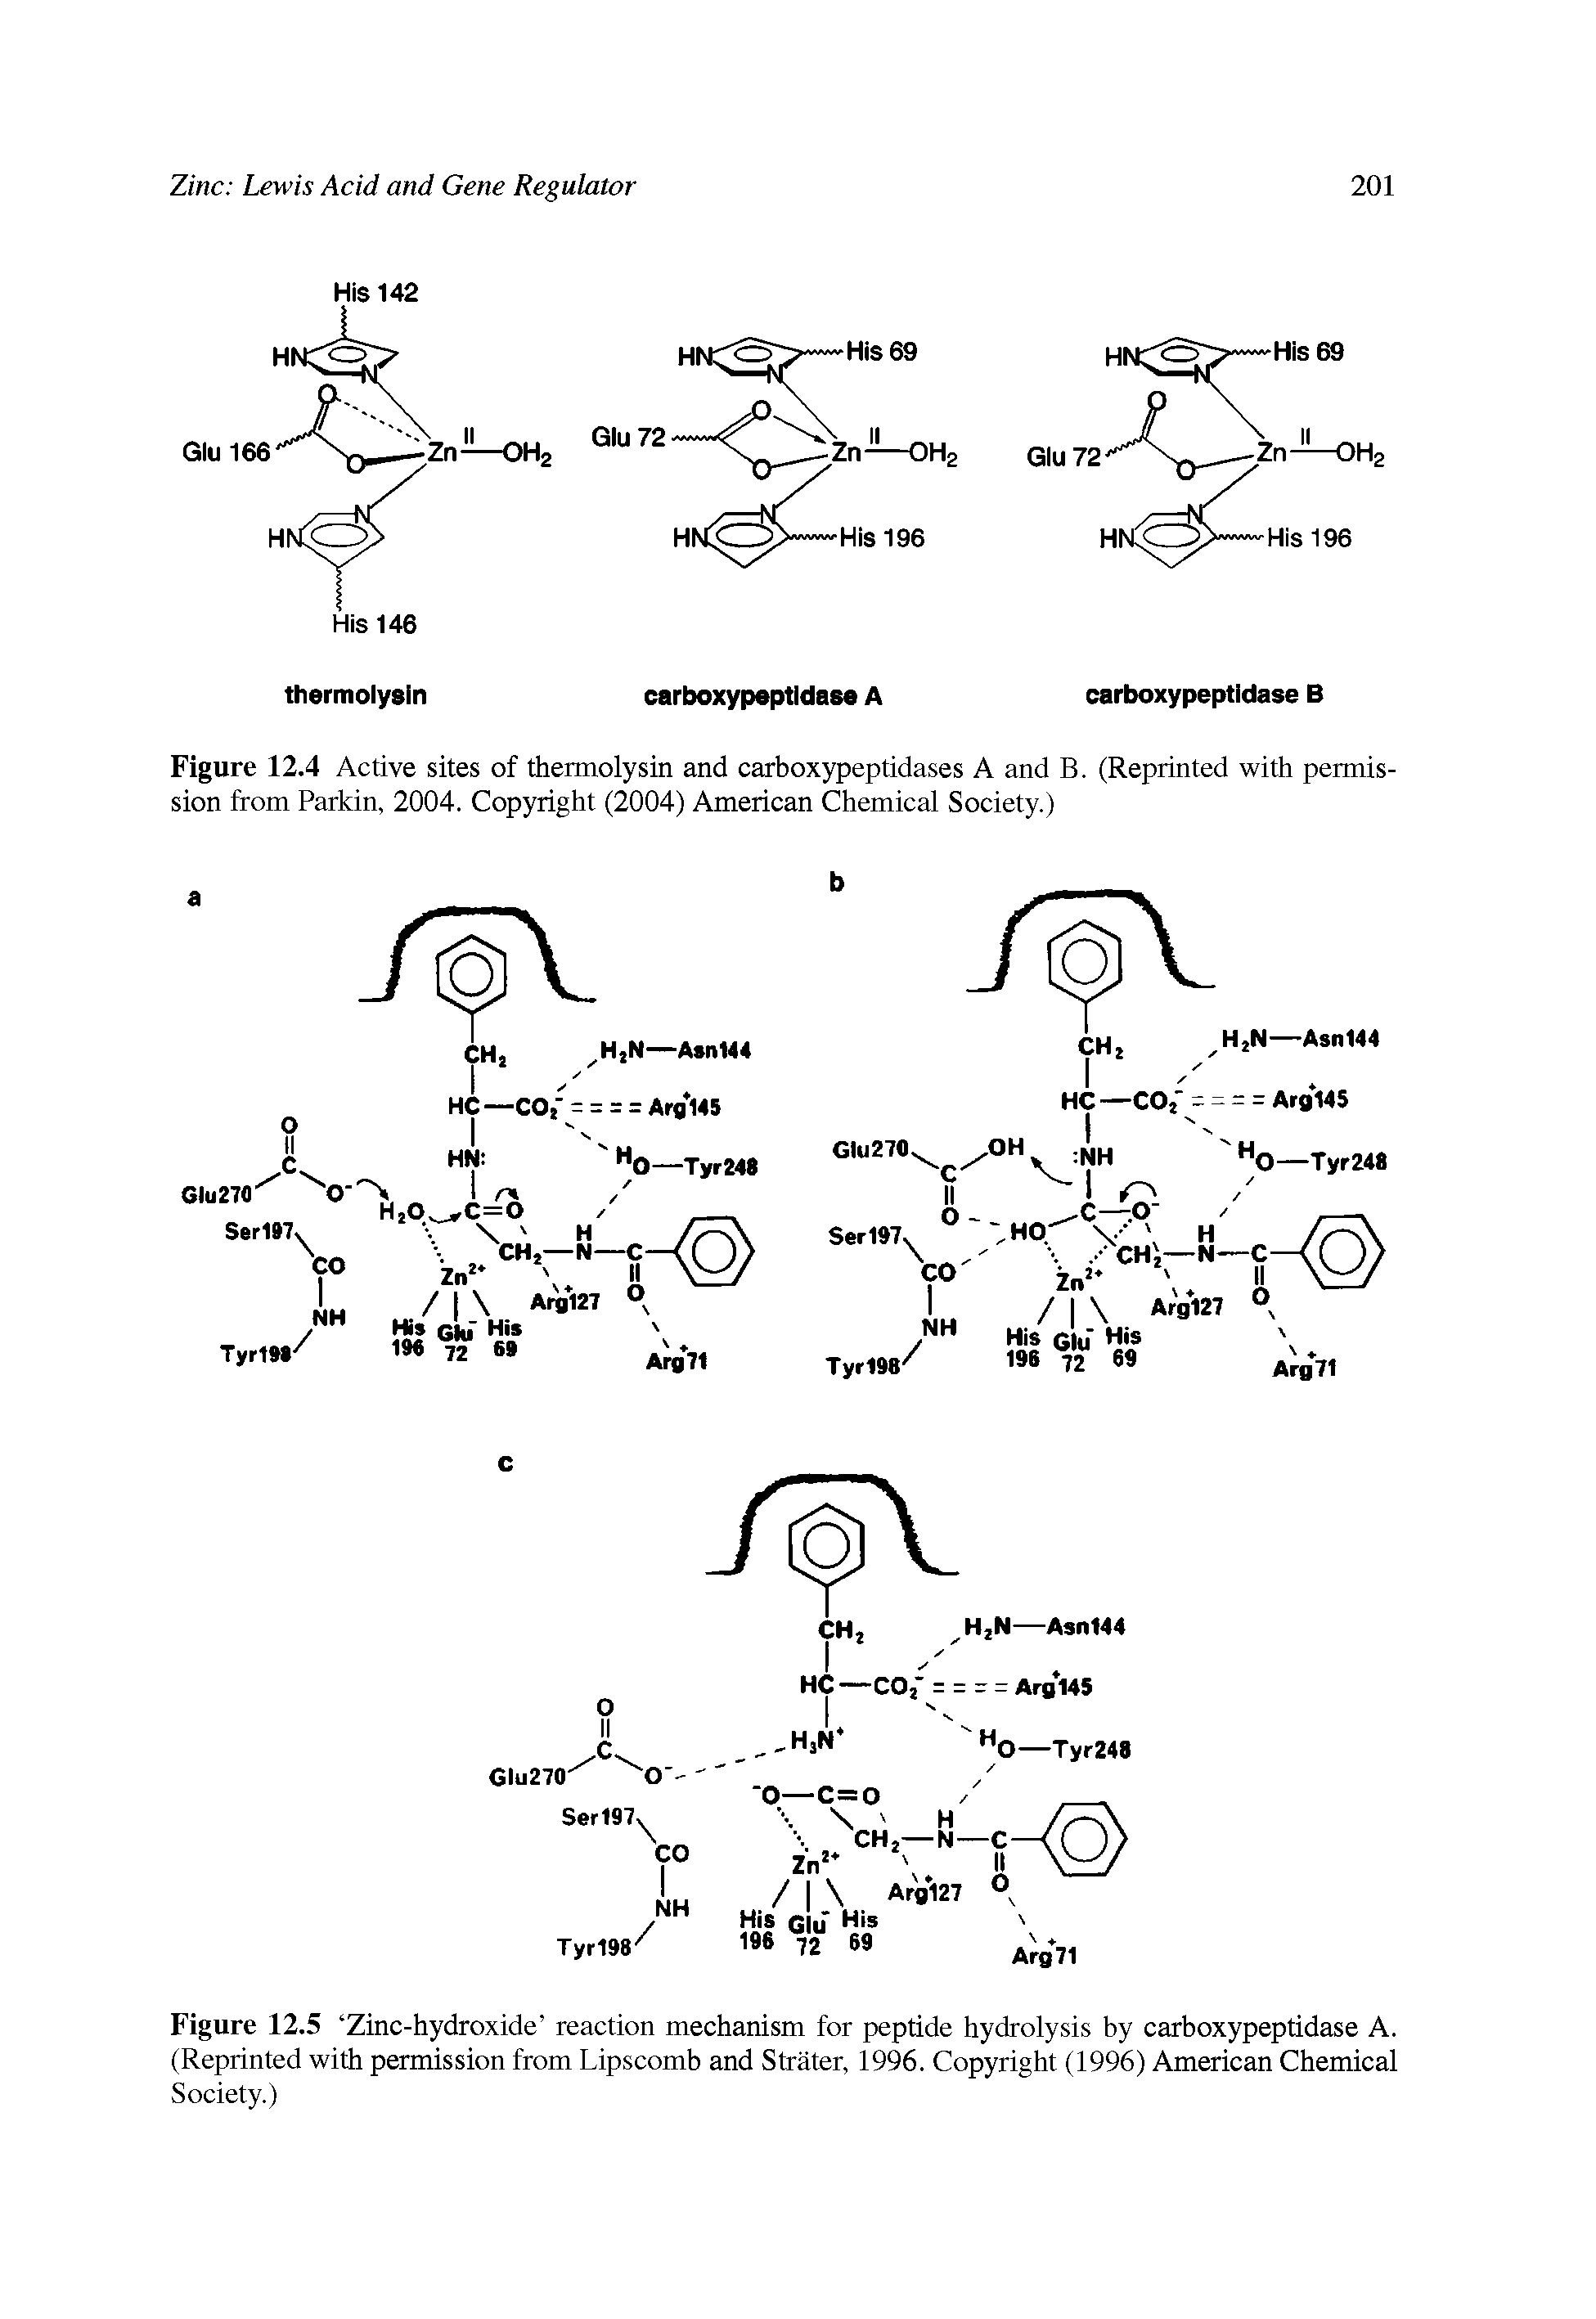 Figure 12.4 Active sites of thermolysin and carboxypeptidases A and B. (Reprinted with permission from Parkin, 2004. Copyright (2004) American Chemical Society.)...